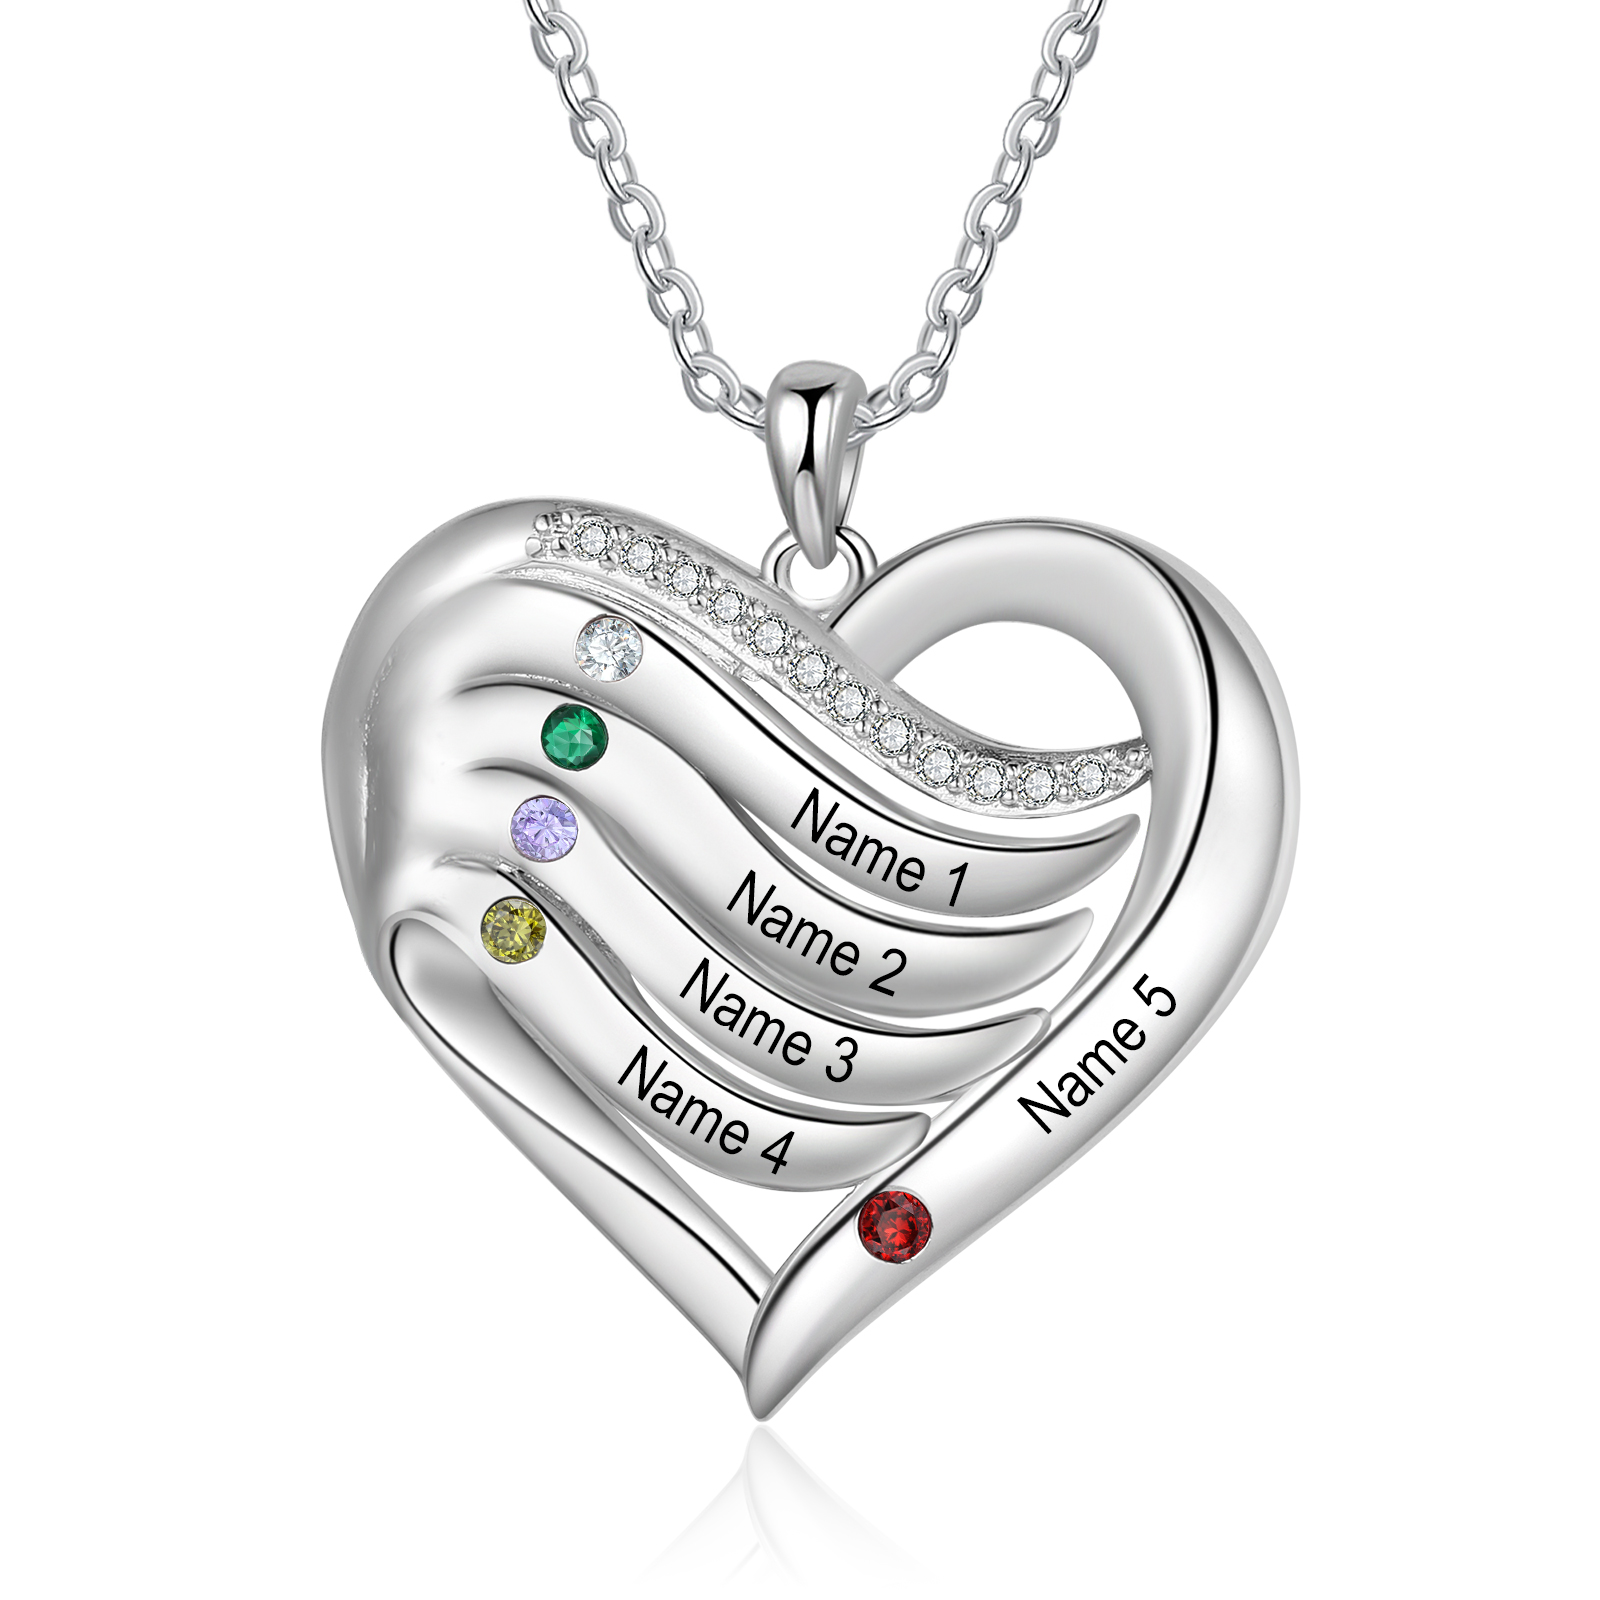 5 Names - Personalized Heart Necklace in Silver with Birthstone and Name Beautiful Gift for Her